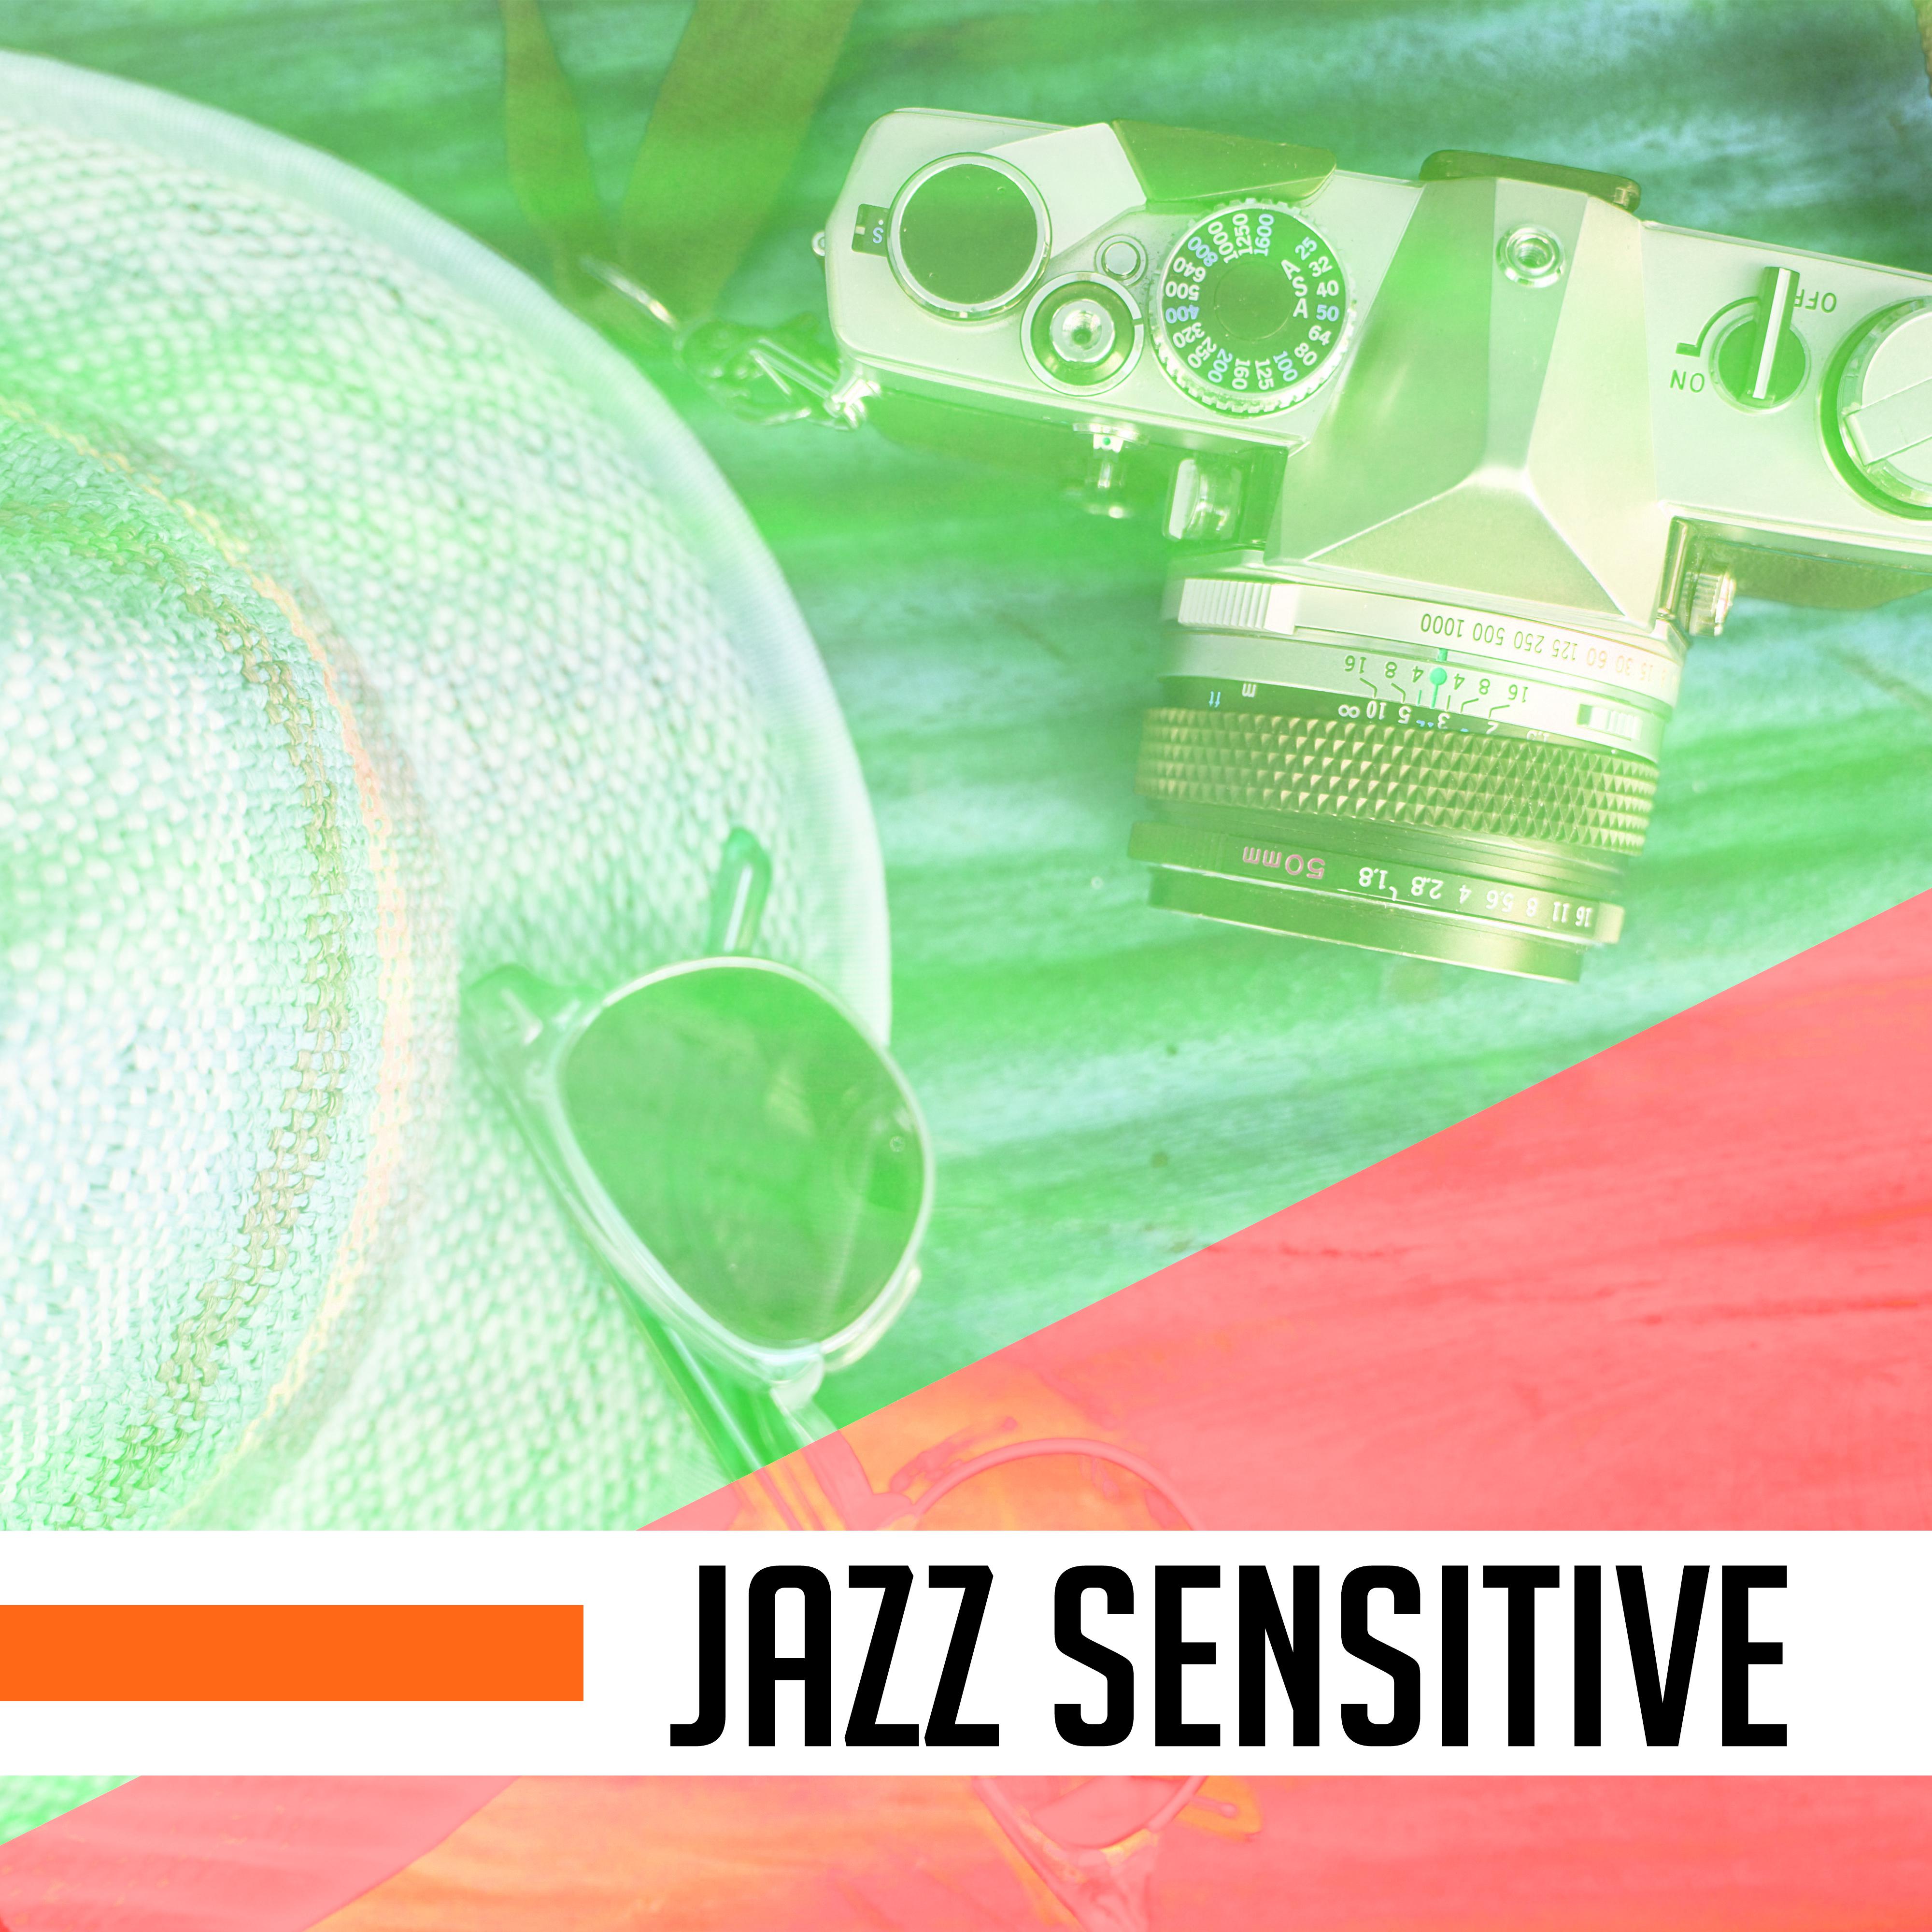 Jazz Sensitive – Romantic Jazz, Instrumental Music, Easy Piano, Relax, Dinner for Two